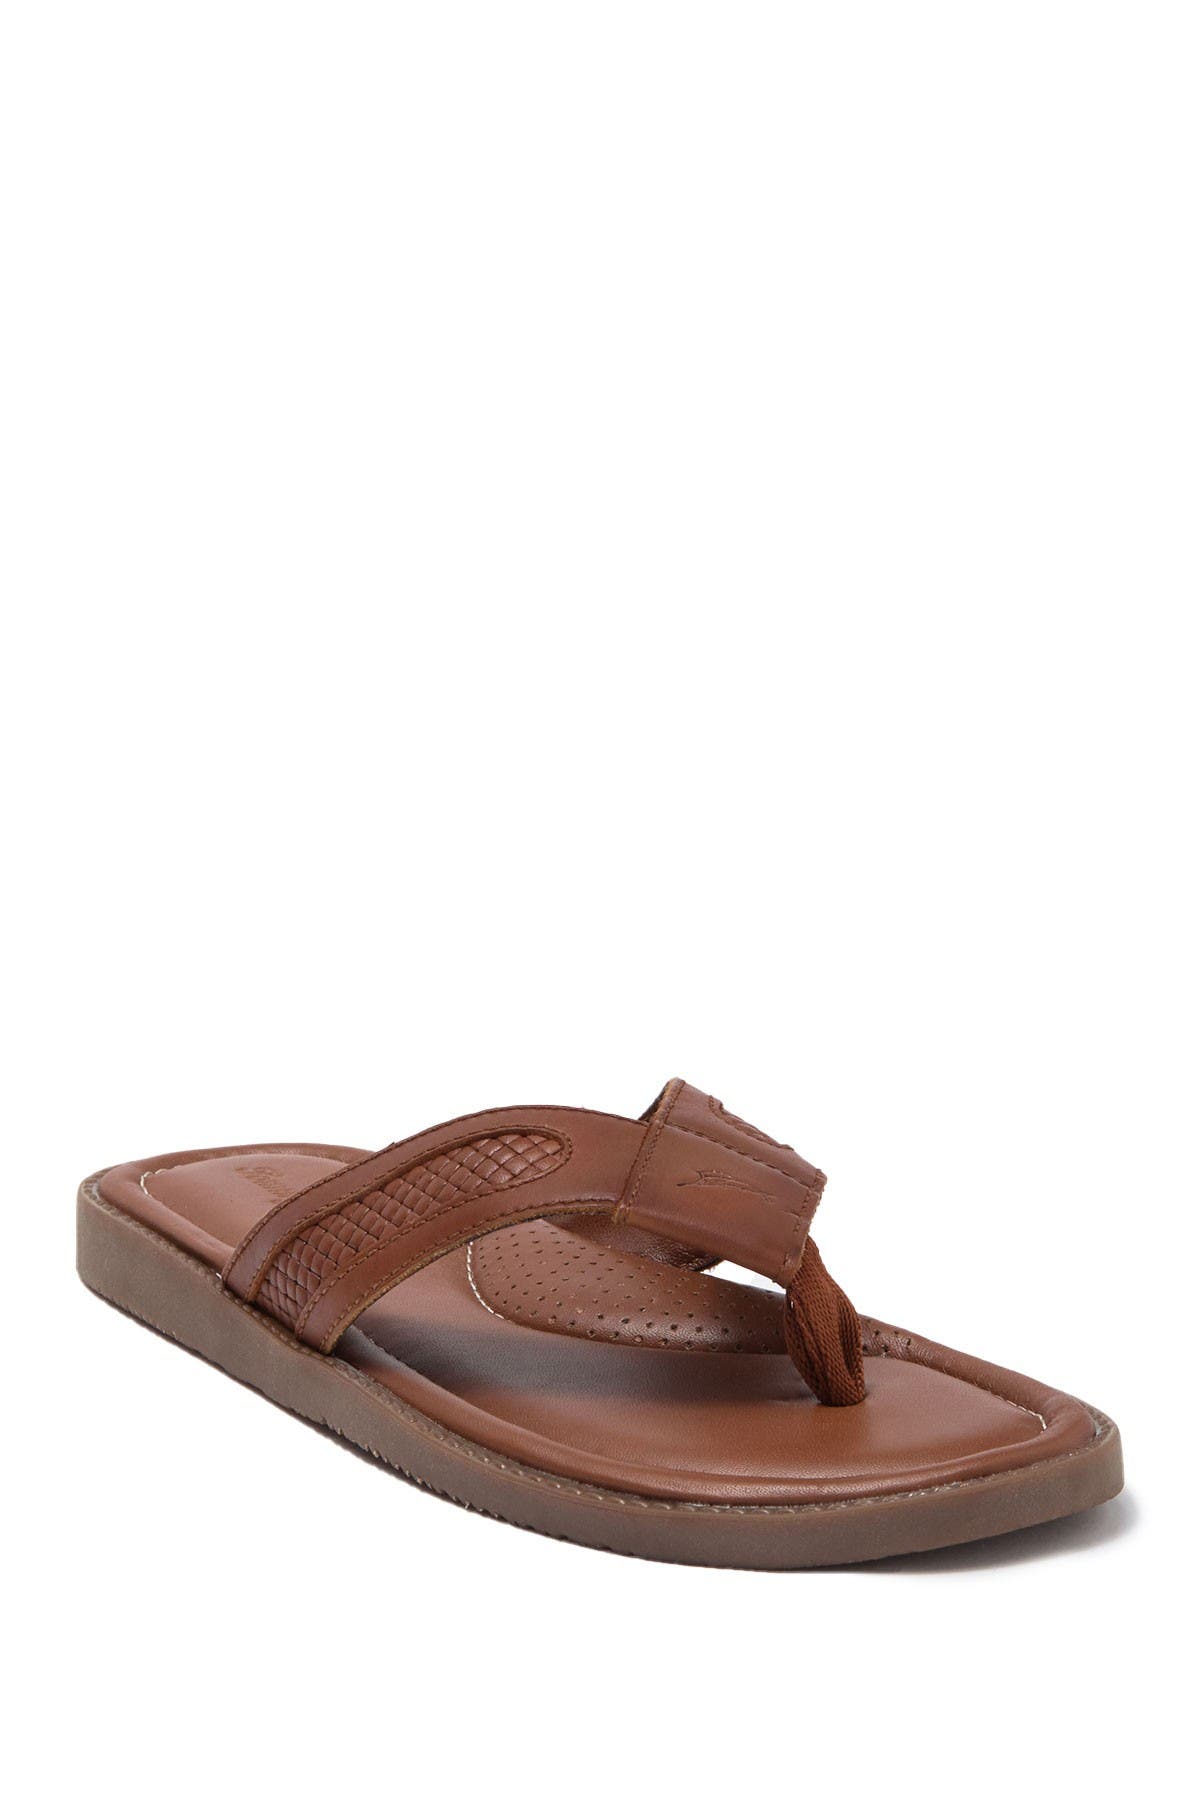 Tommy Bahama | Asher Leather Flip Flop 